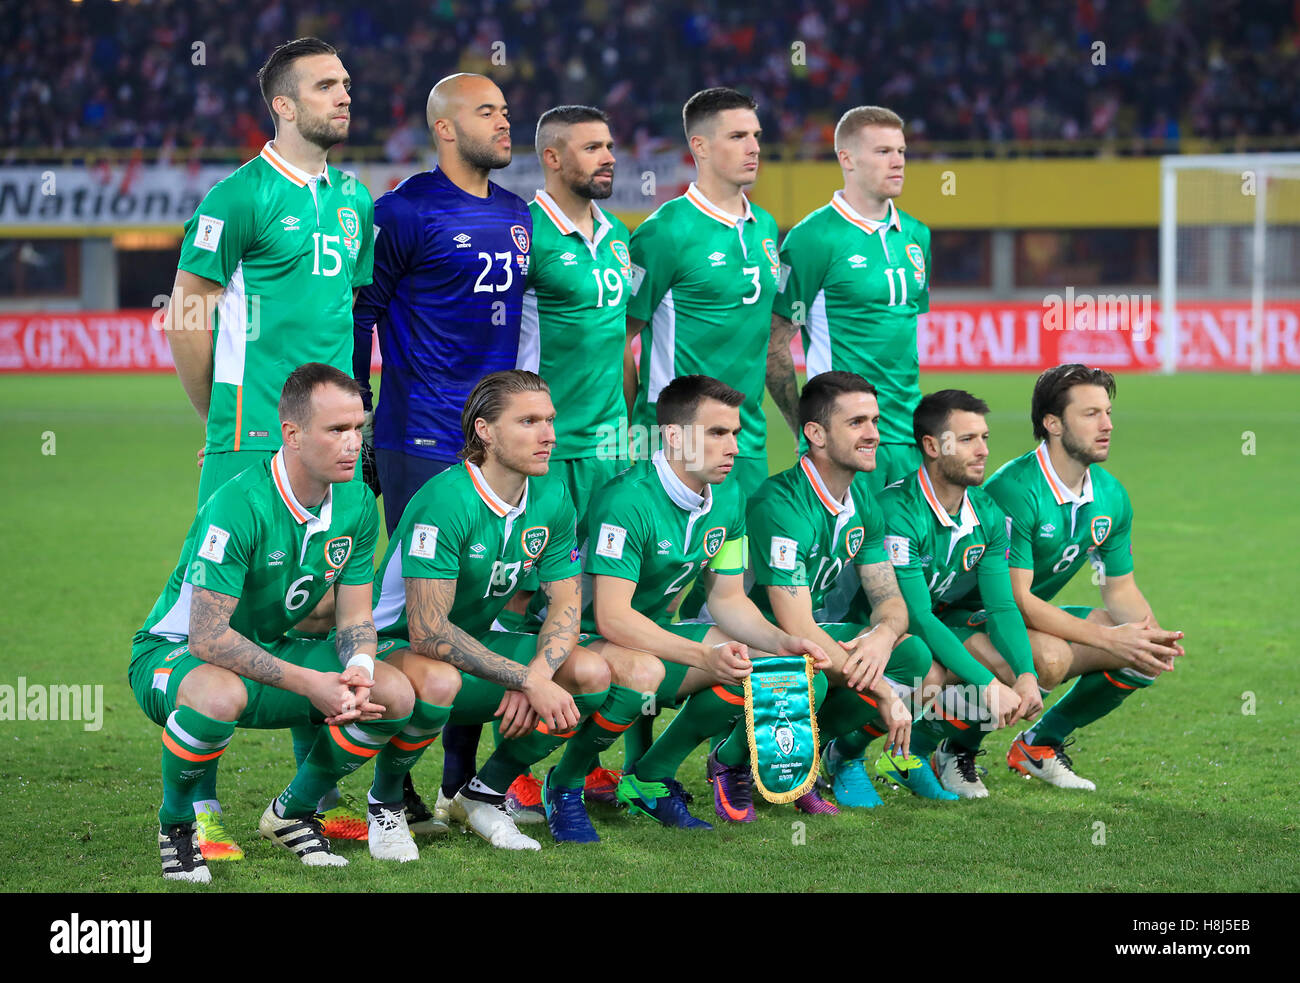 Republic of Ireland Team Group. Top Row (left to right) Cyrus Christie, Darren Randolph, Jonathan Walters, Ciaran Clark and James McClean. Bottom Row (left to right) Glenn Whelan, Jeff Hendrick, Seamus Coleman, Robbie Brady, Wes Hoolahan and Harry Arter prior to the 2018 FIFA World Cup Qualifying, Group D match at the Ernst-Happel-Stadion, Vienna. Stock Photo